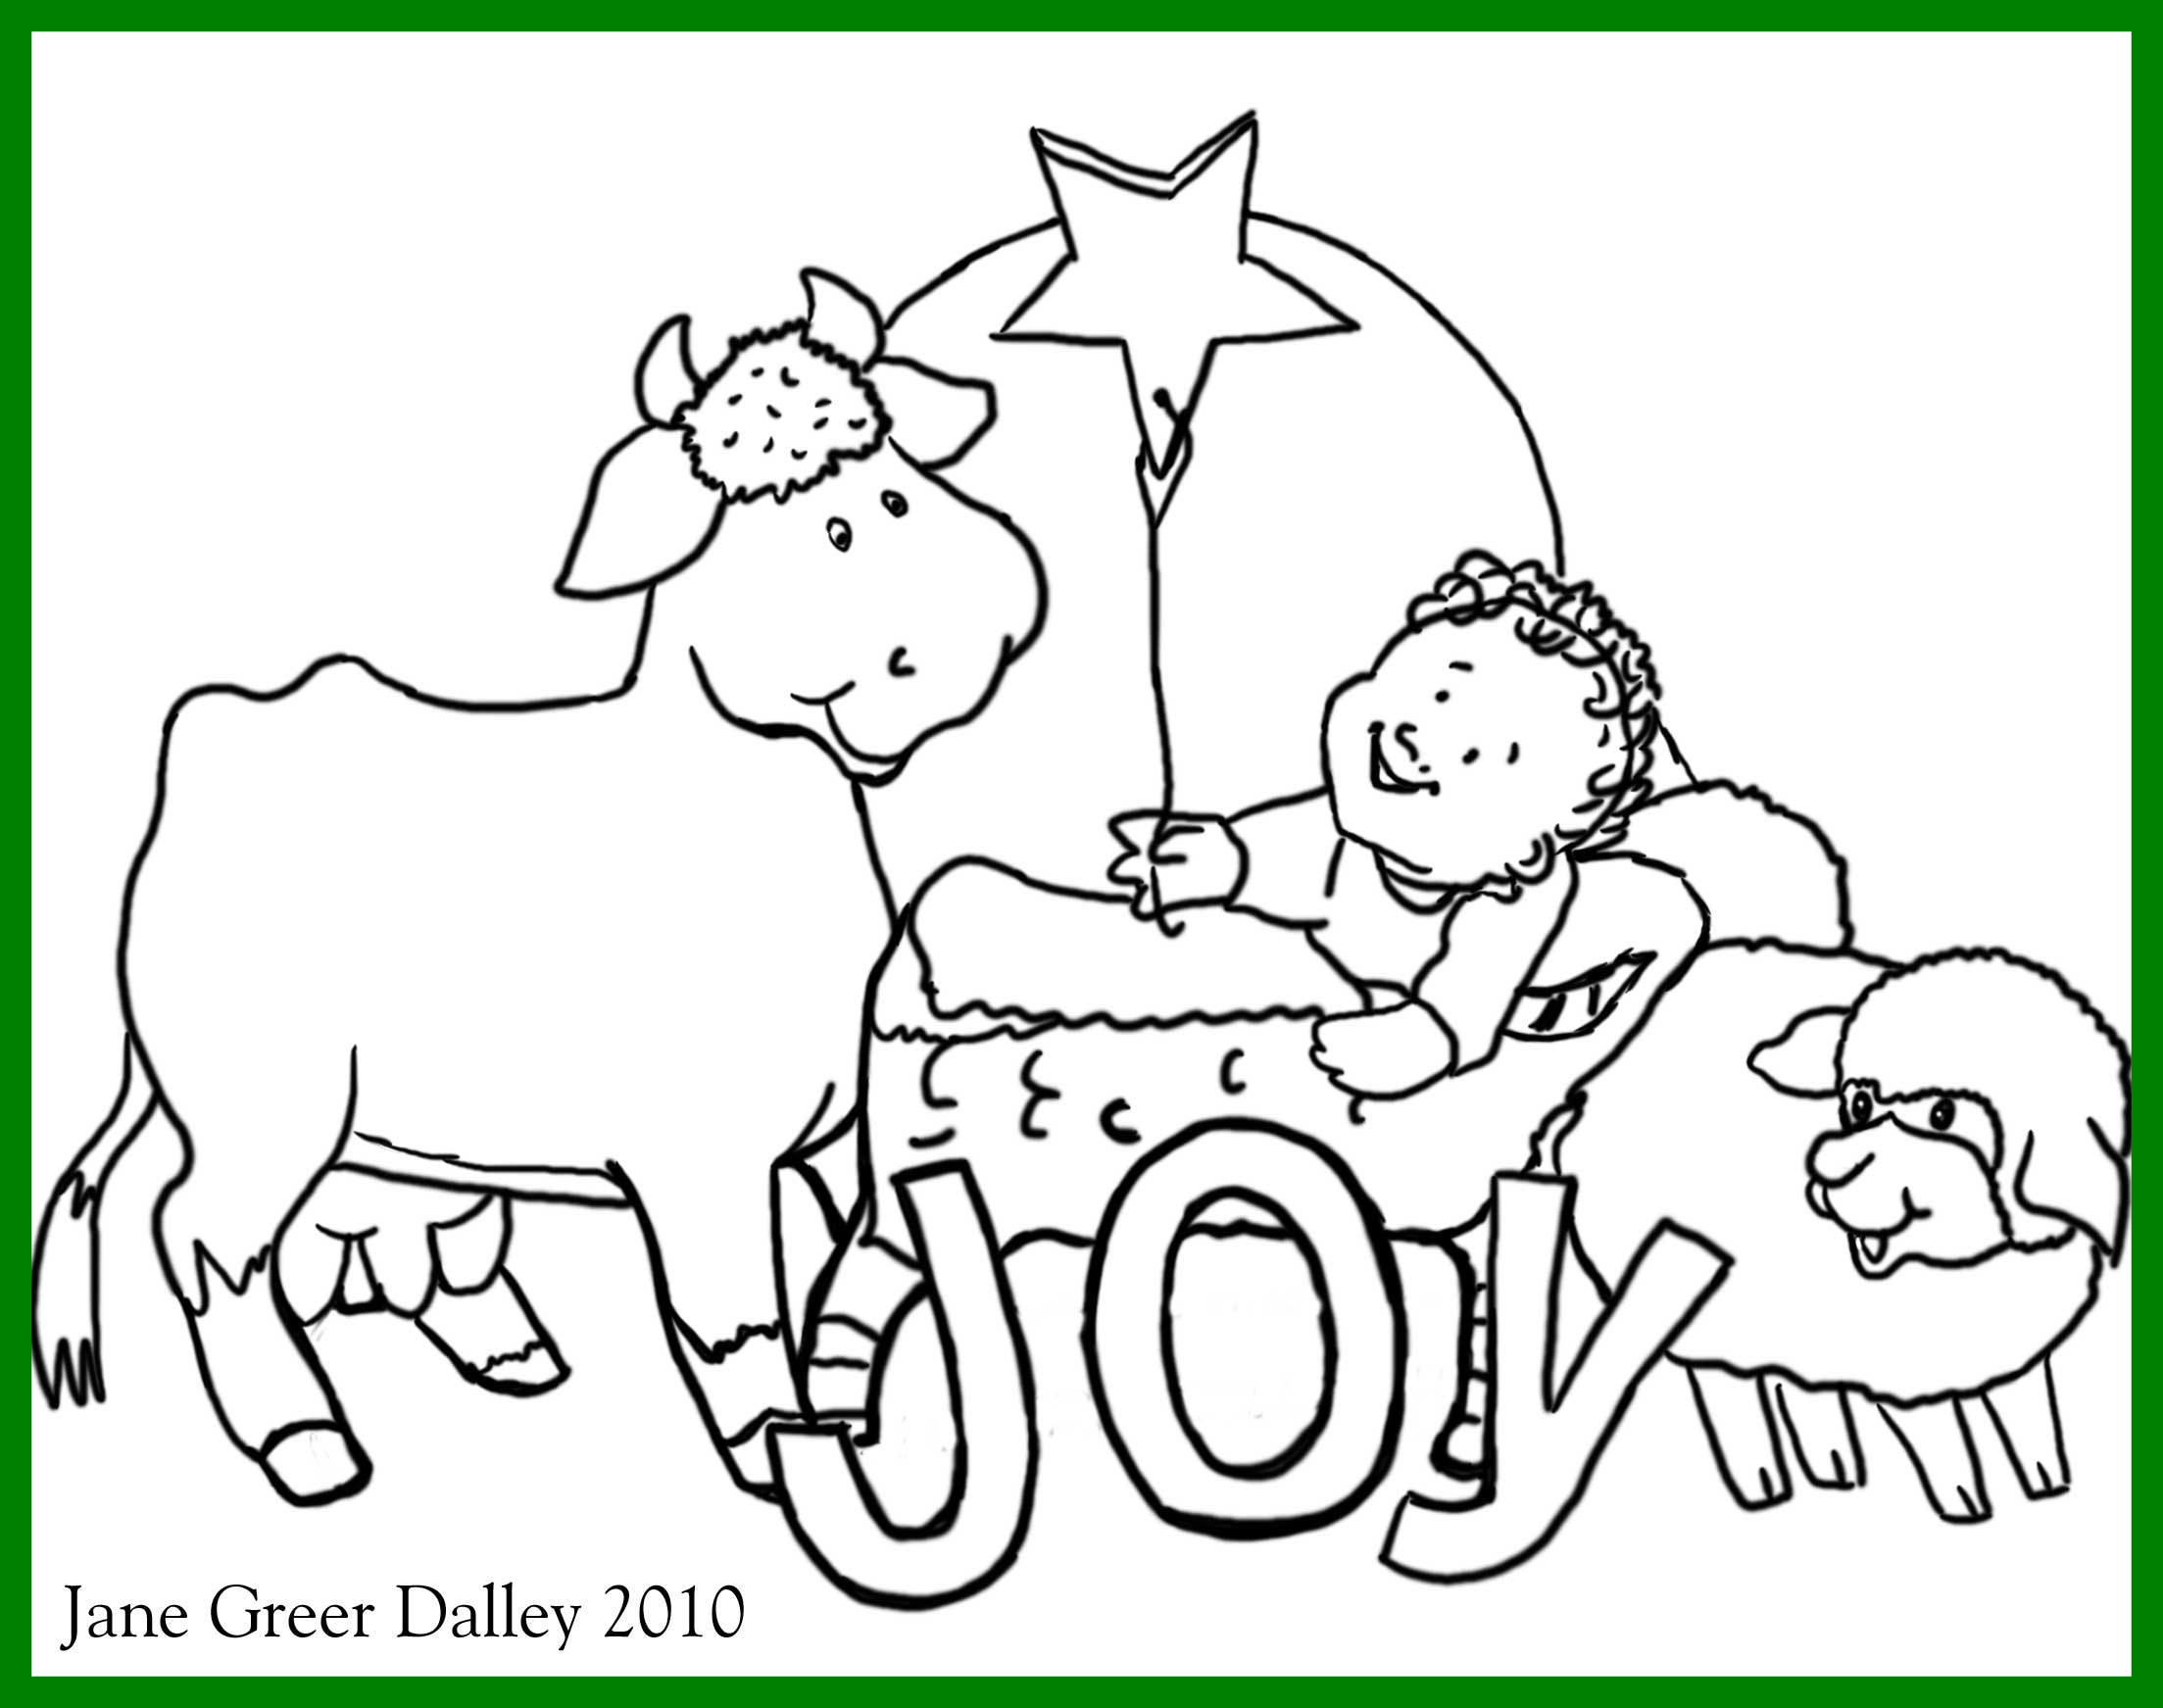 Download Christmas Village Coloring Pages at GetDrawings.com | Free for personal use Christmas Village ...